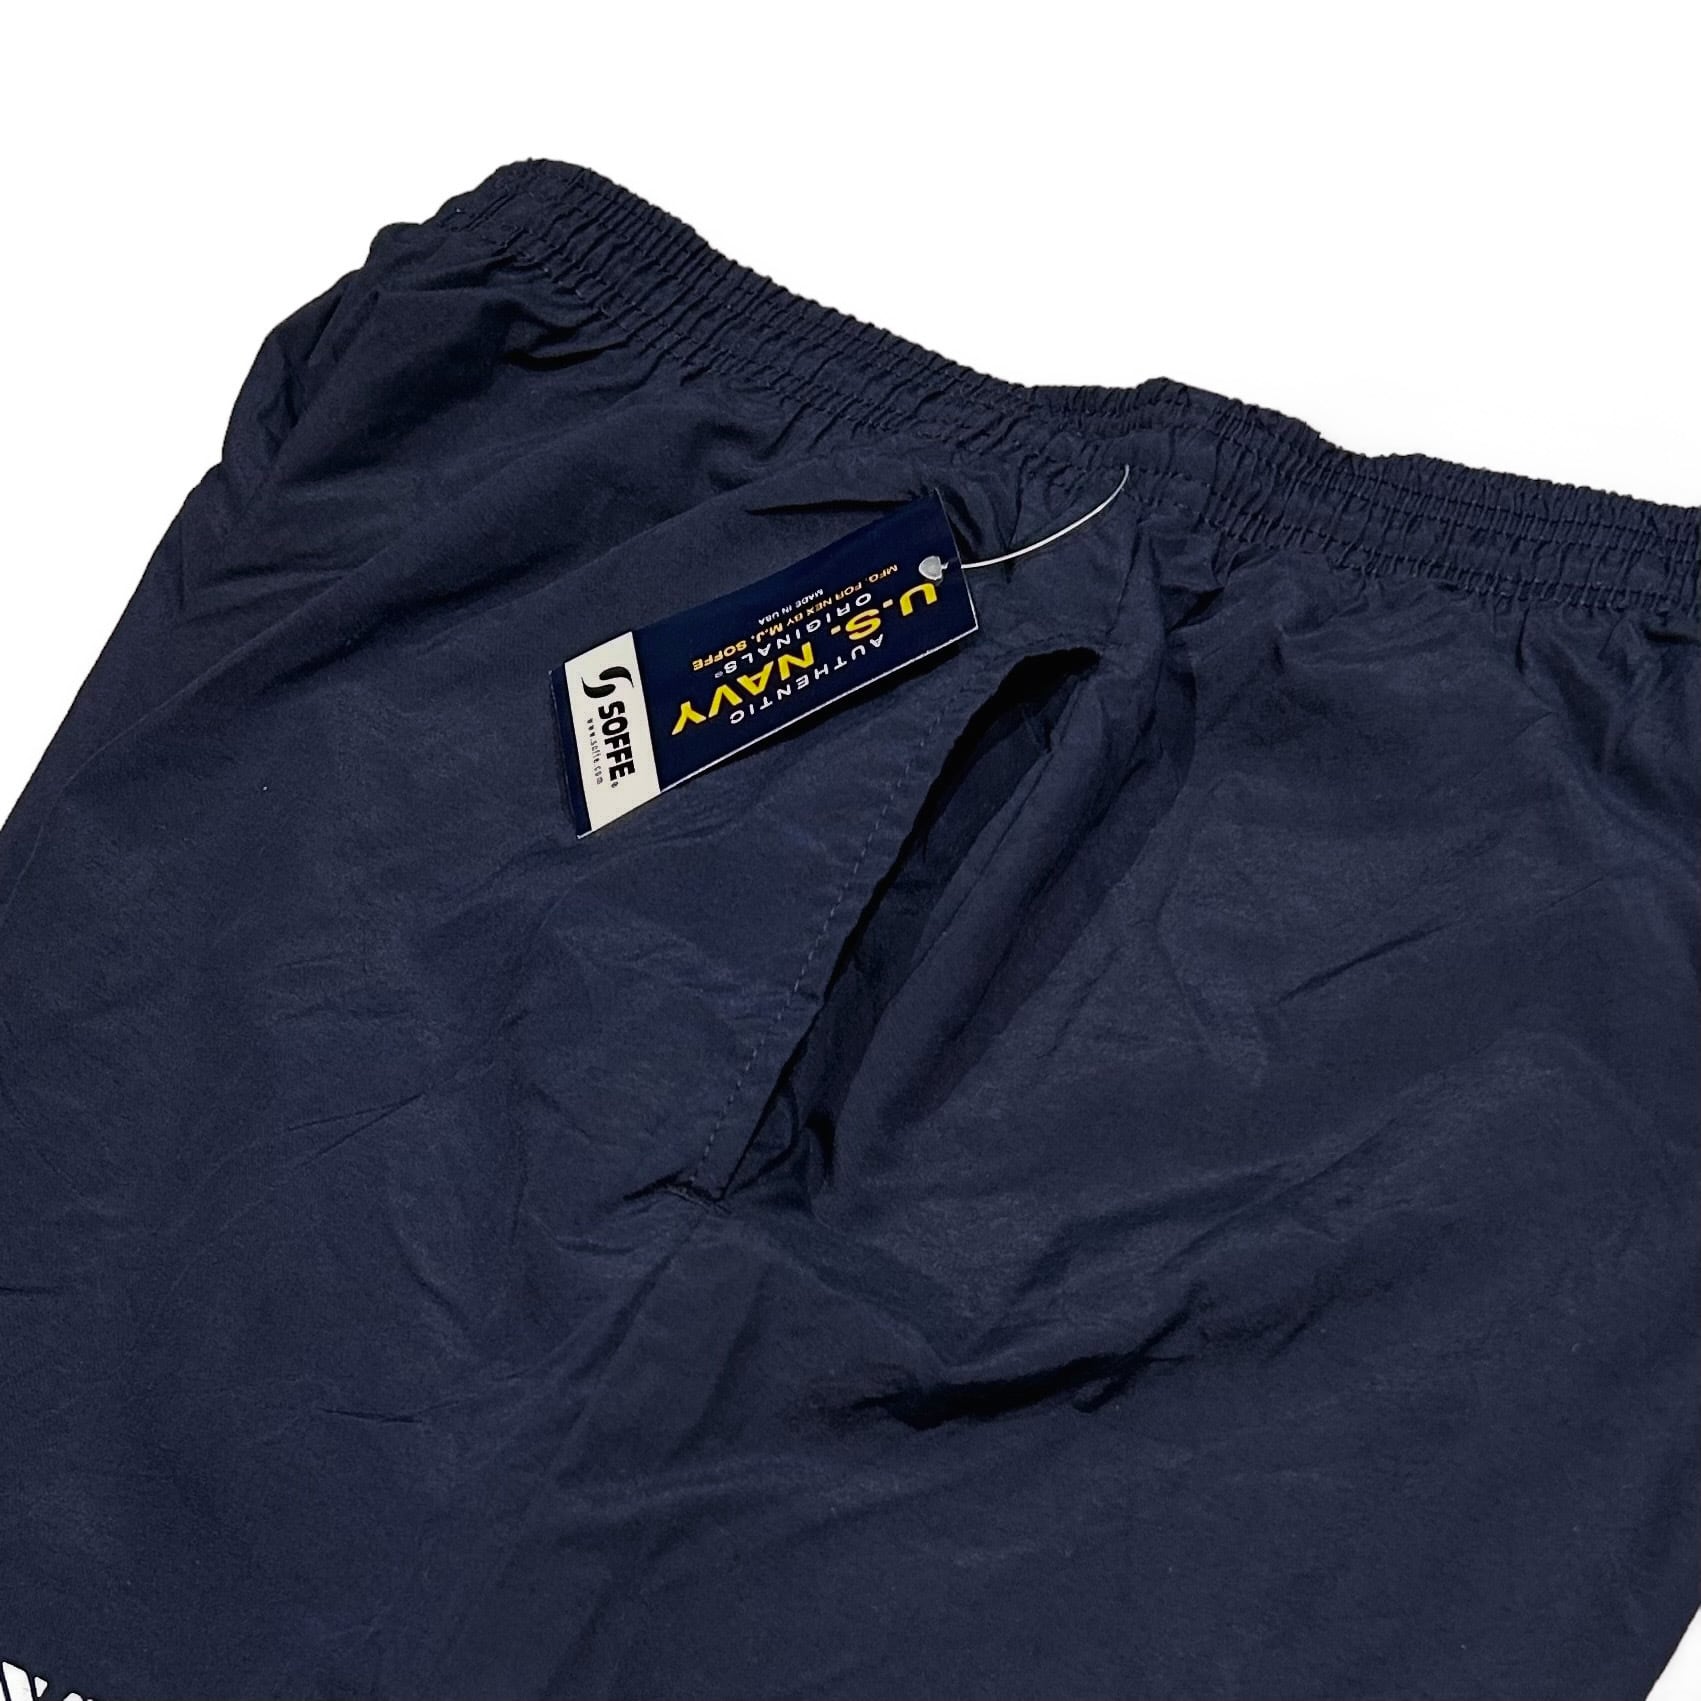 SOFFE USA製 US Navy Official Physical Training Shorts / アメリカ軍 ソフィー ミリタリー  フィジカルトレーニングショーツ